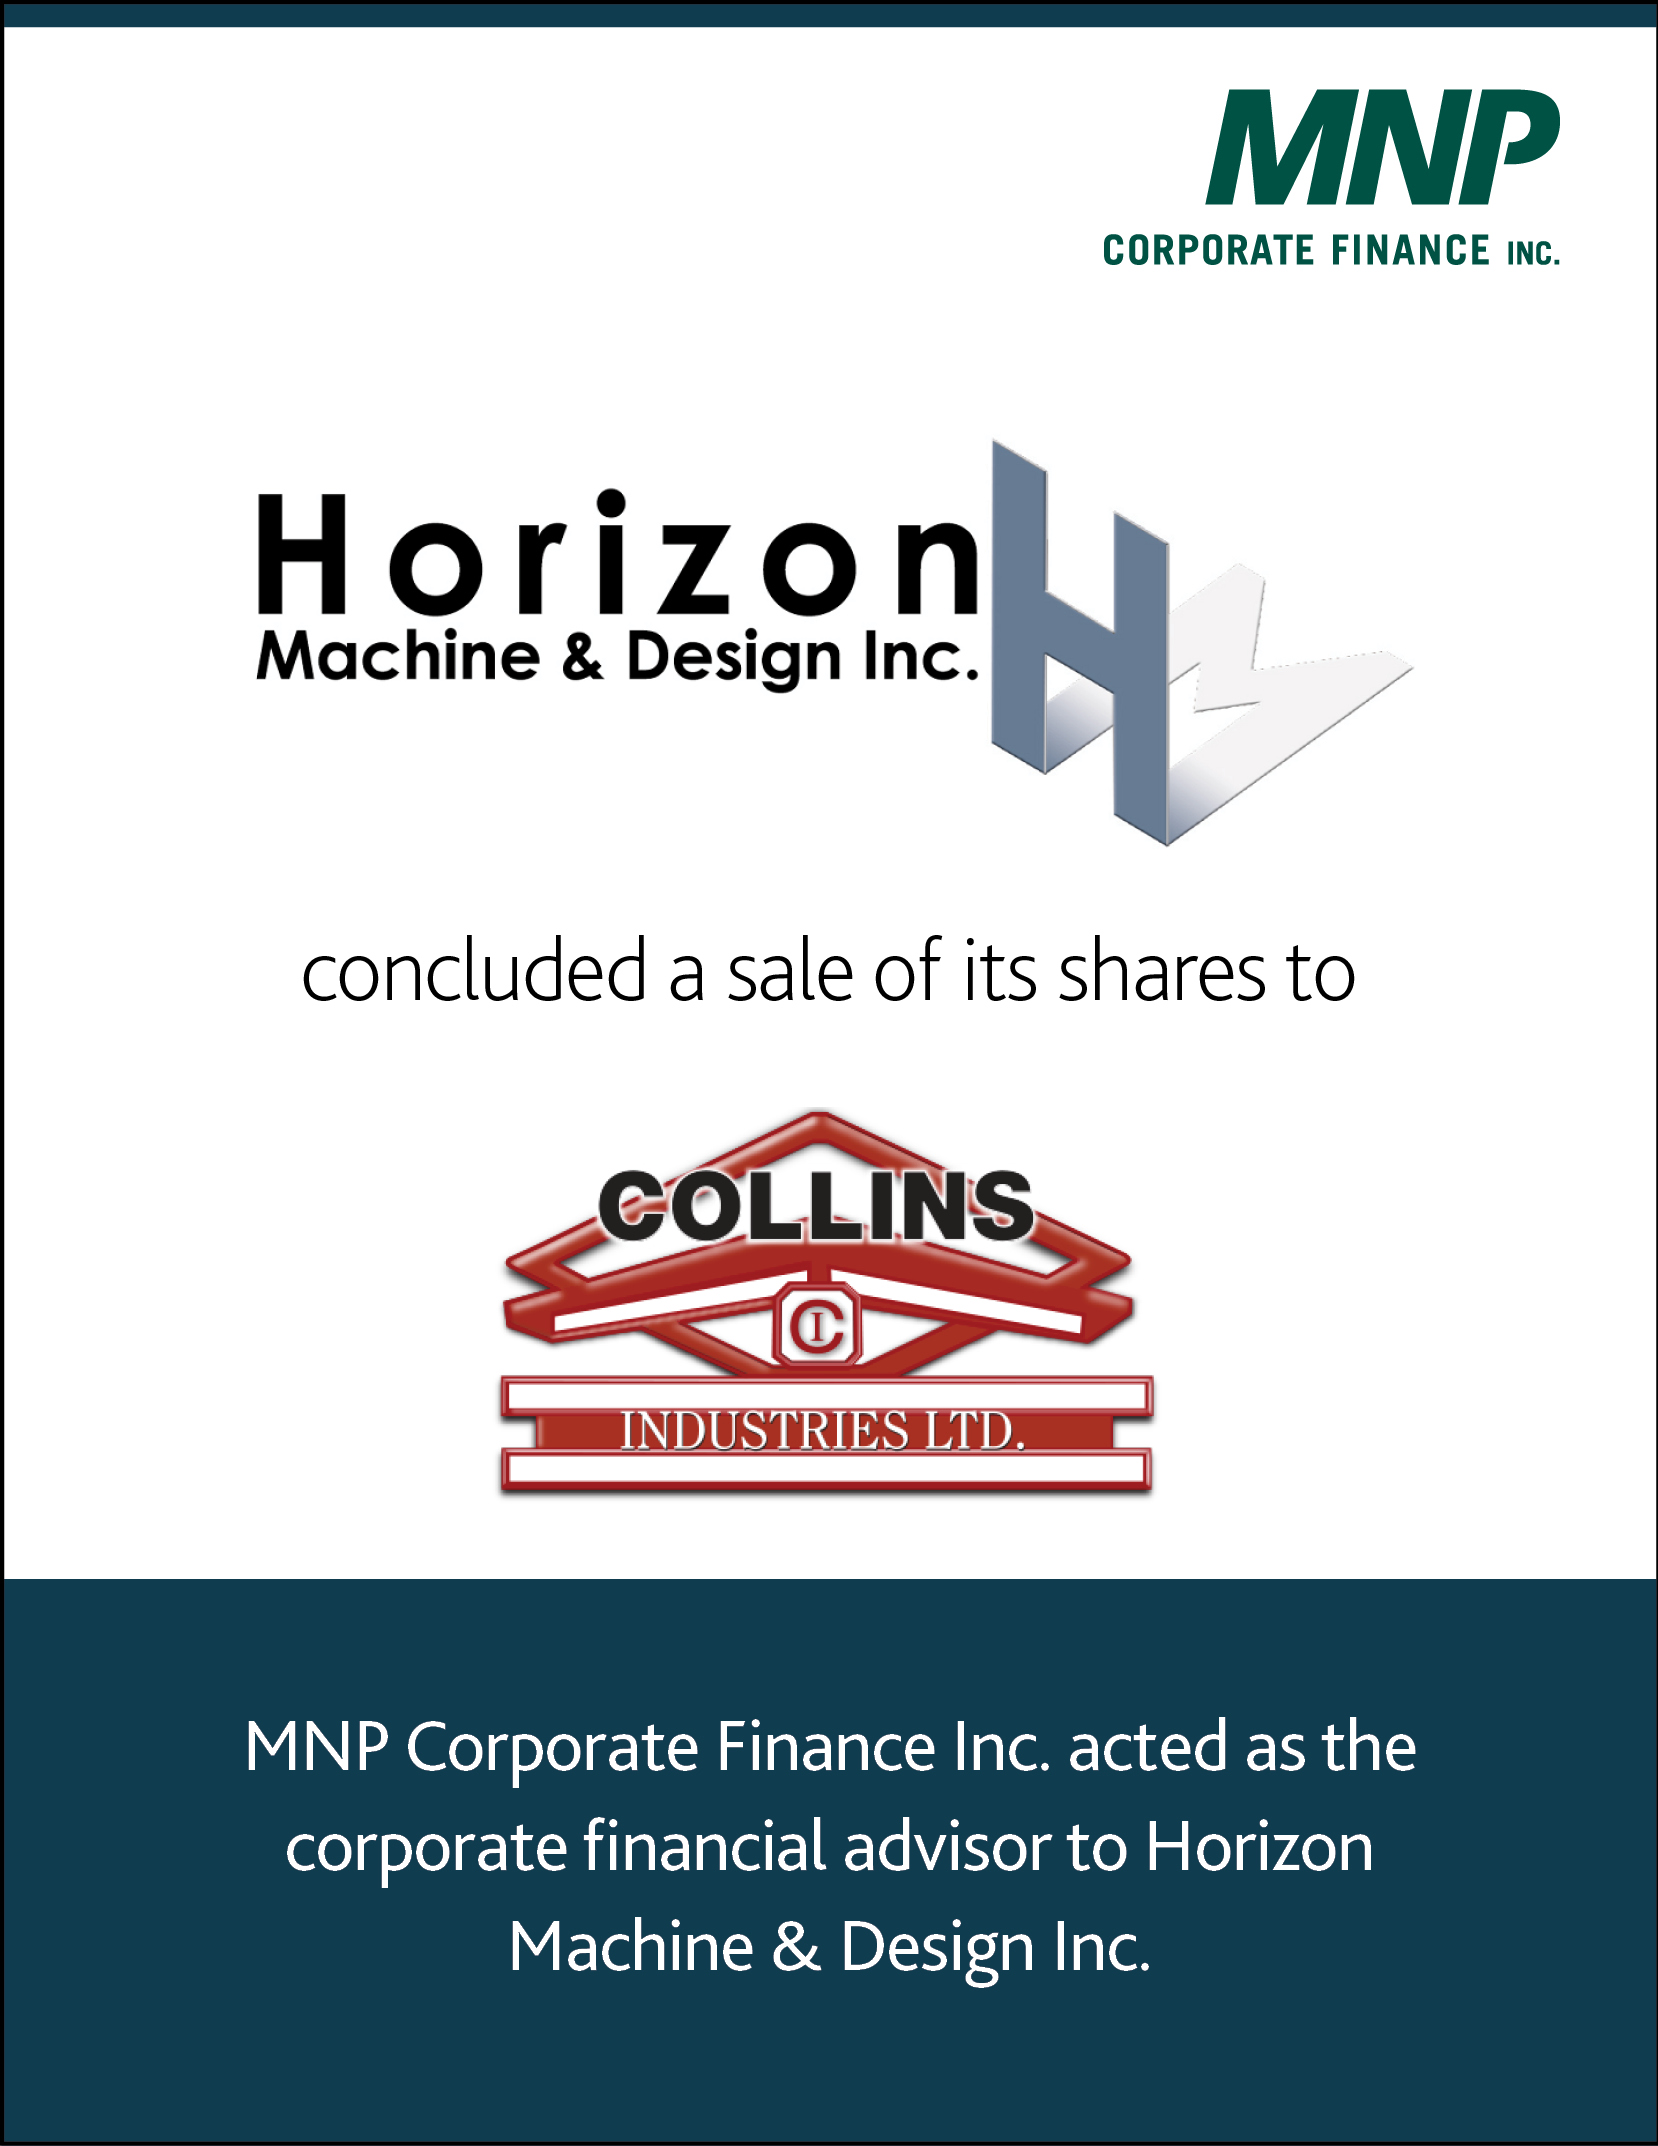 Horizon Machine & Design Inc concluded a sale of its shares to Collins Industries Ltd 